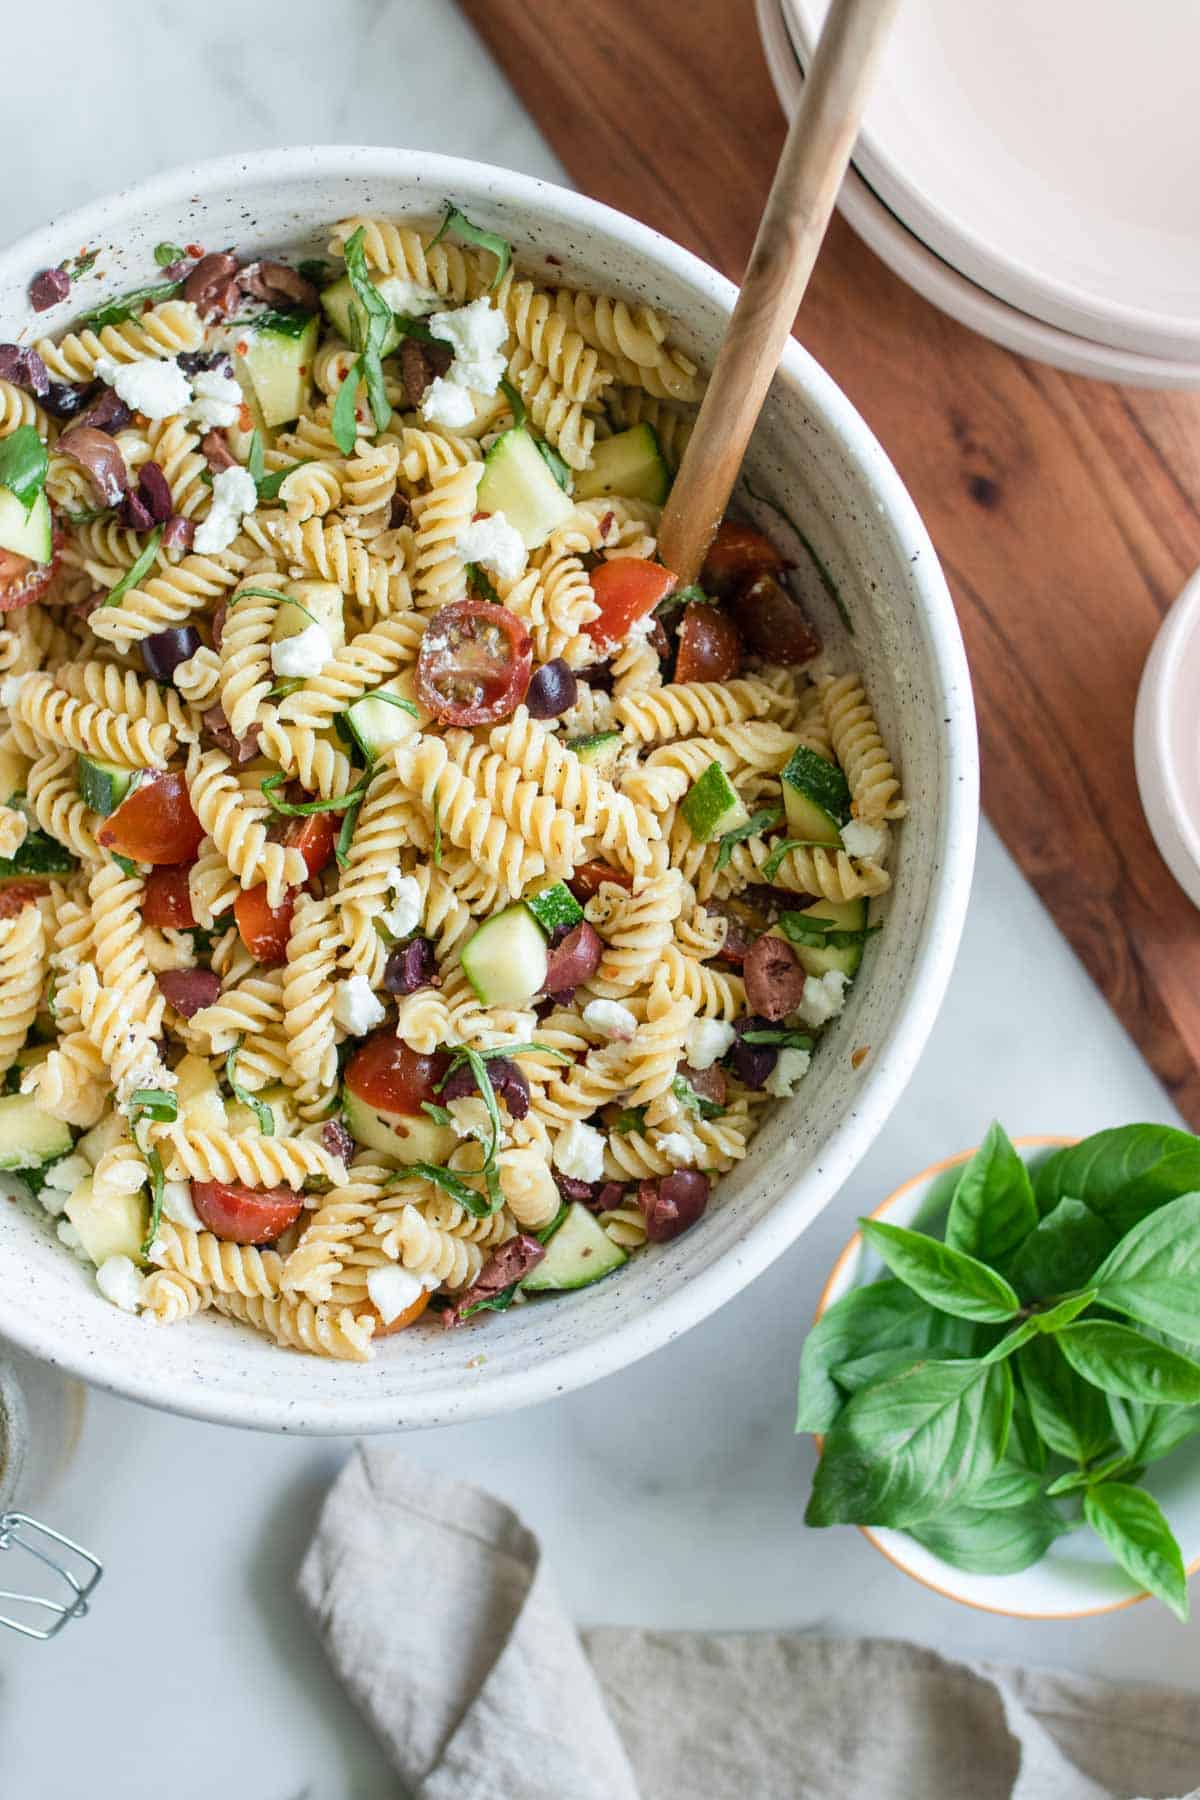 Mixing together pasta salad with a wood spoon.